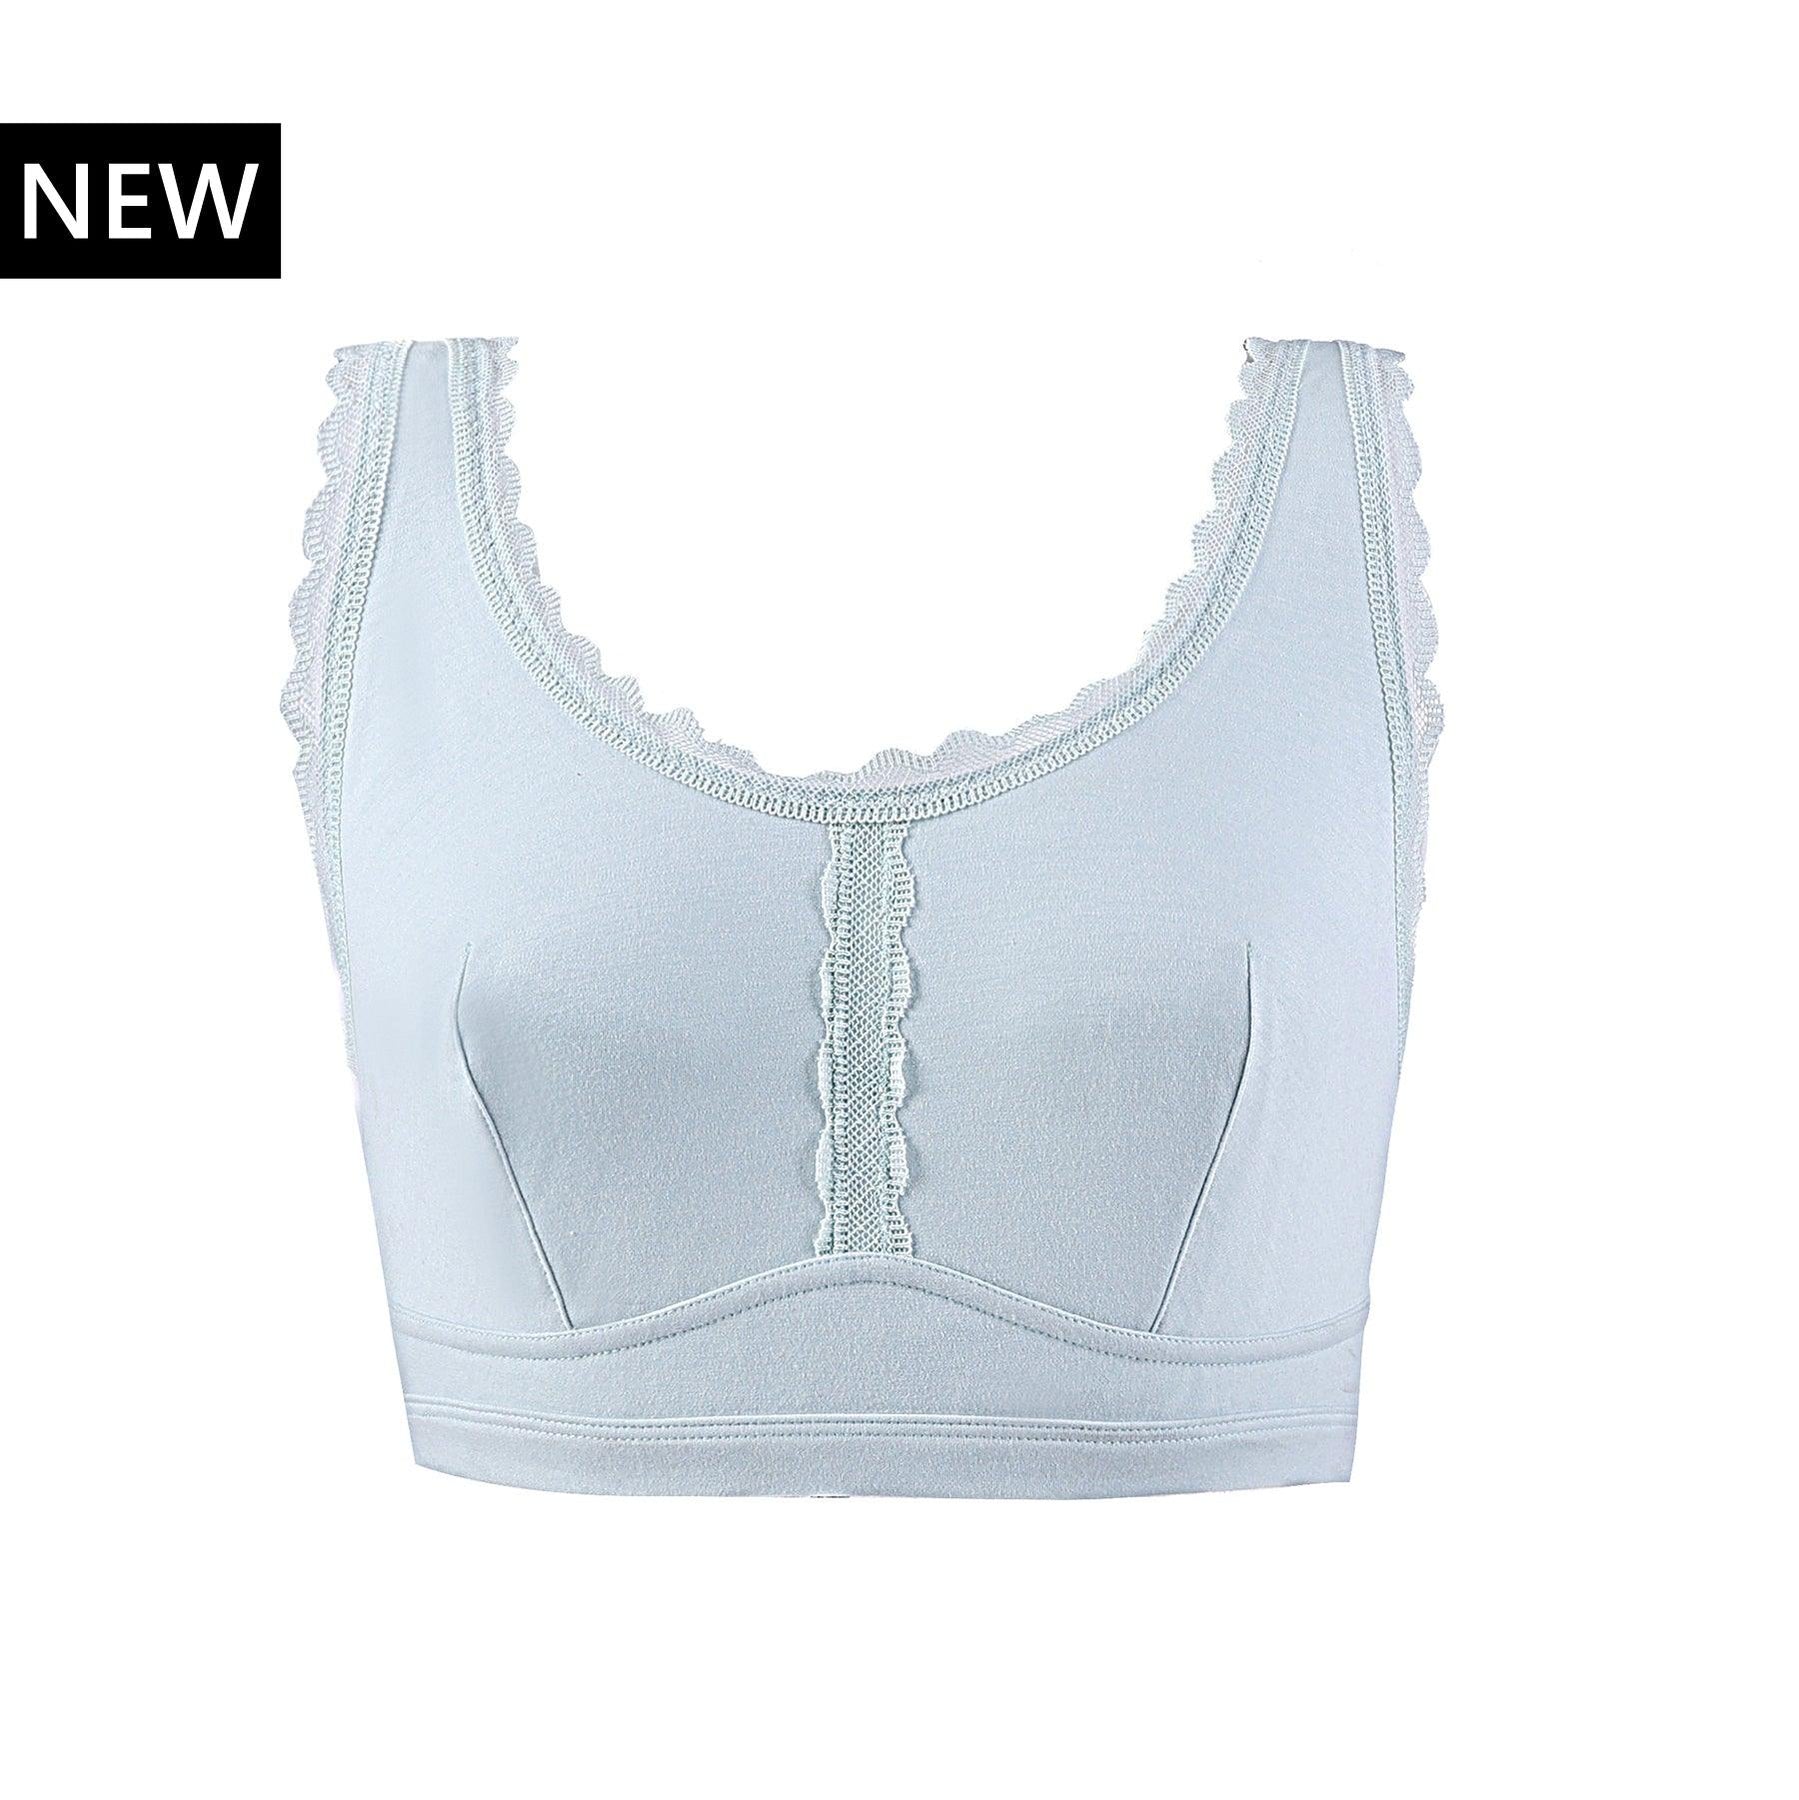 9 Girls Try on 34B Bras and Prove That Bra Sizes Are B.S.